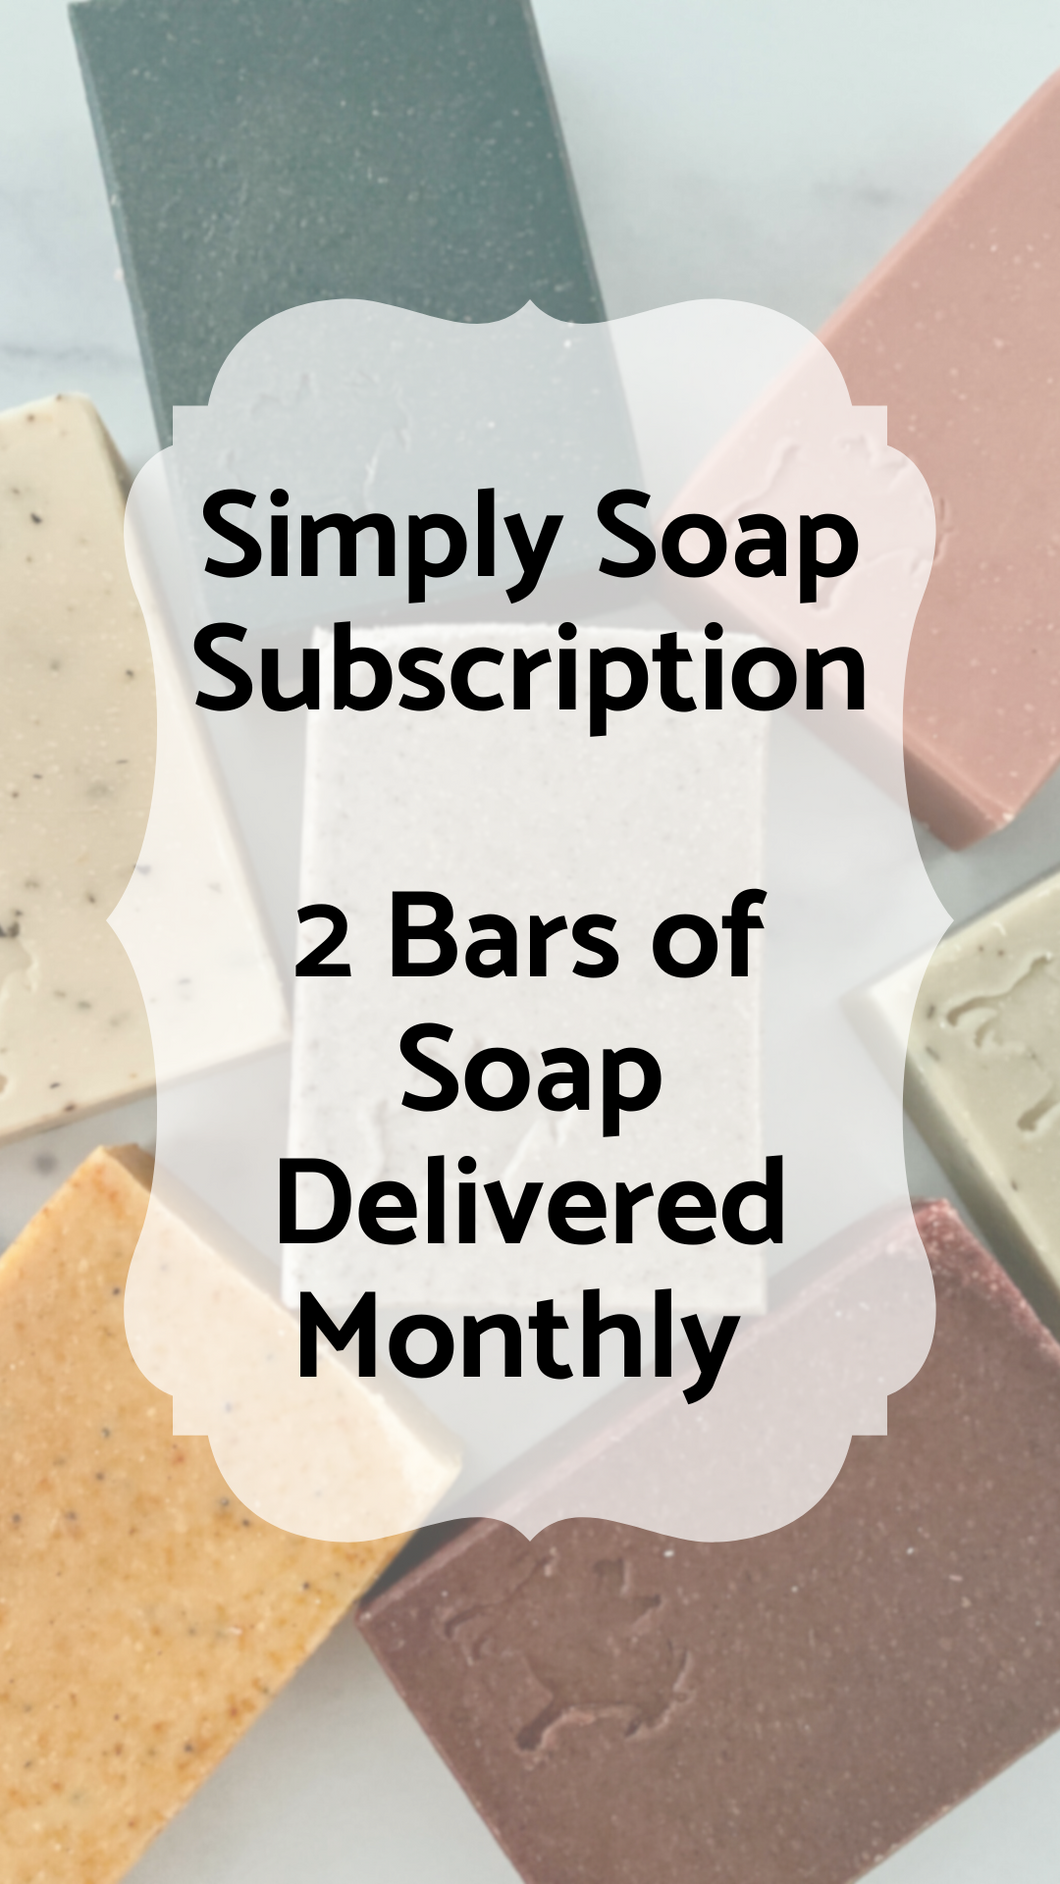 Simply Soap Subscription - 2 bars of soap delivered monthly